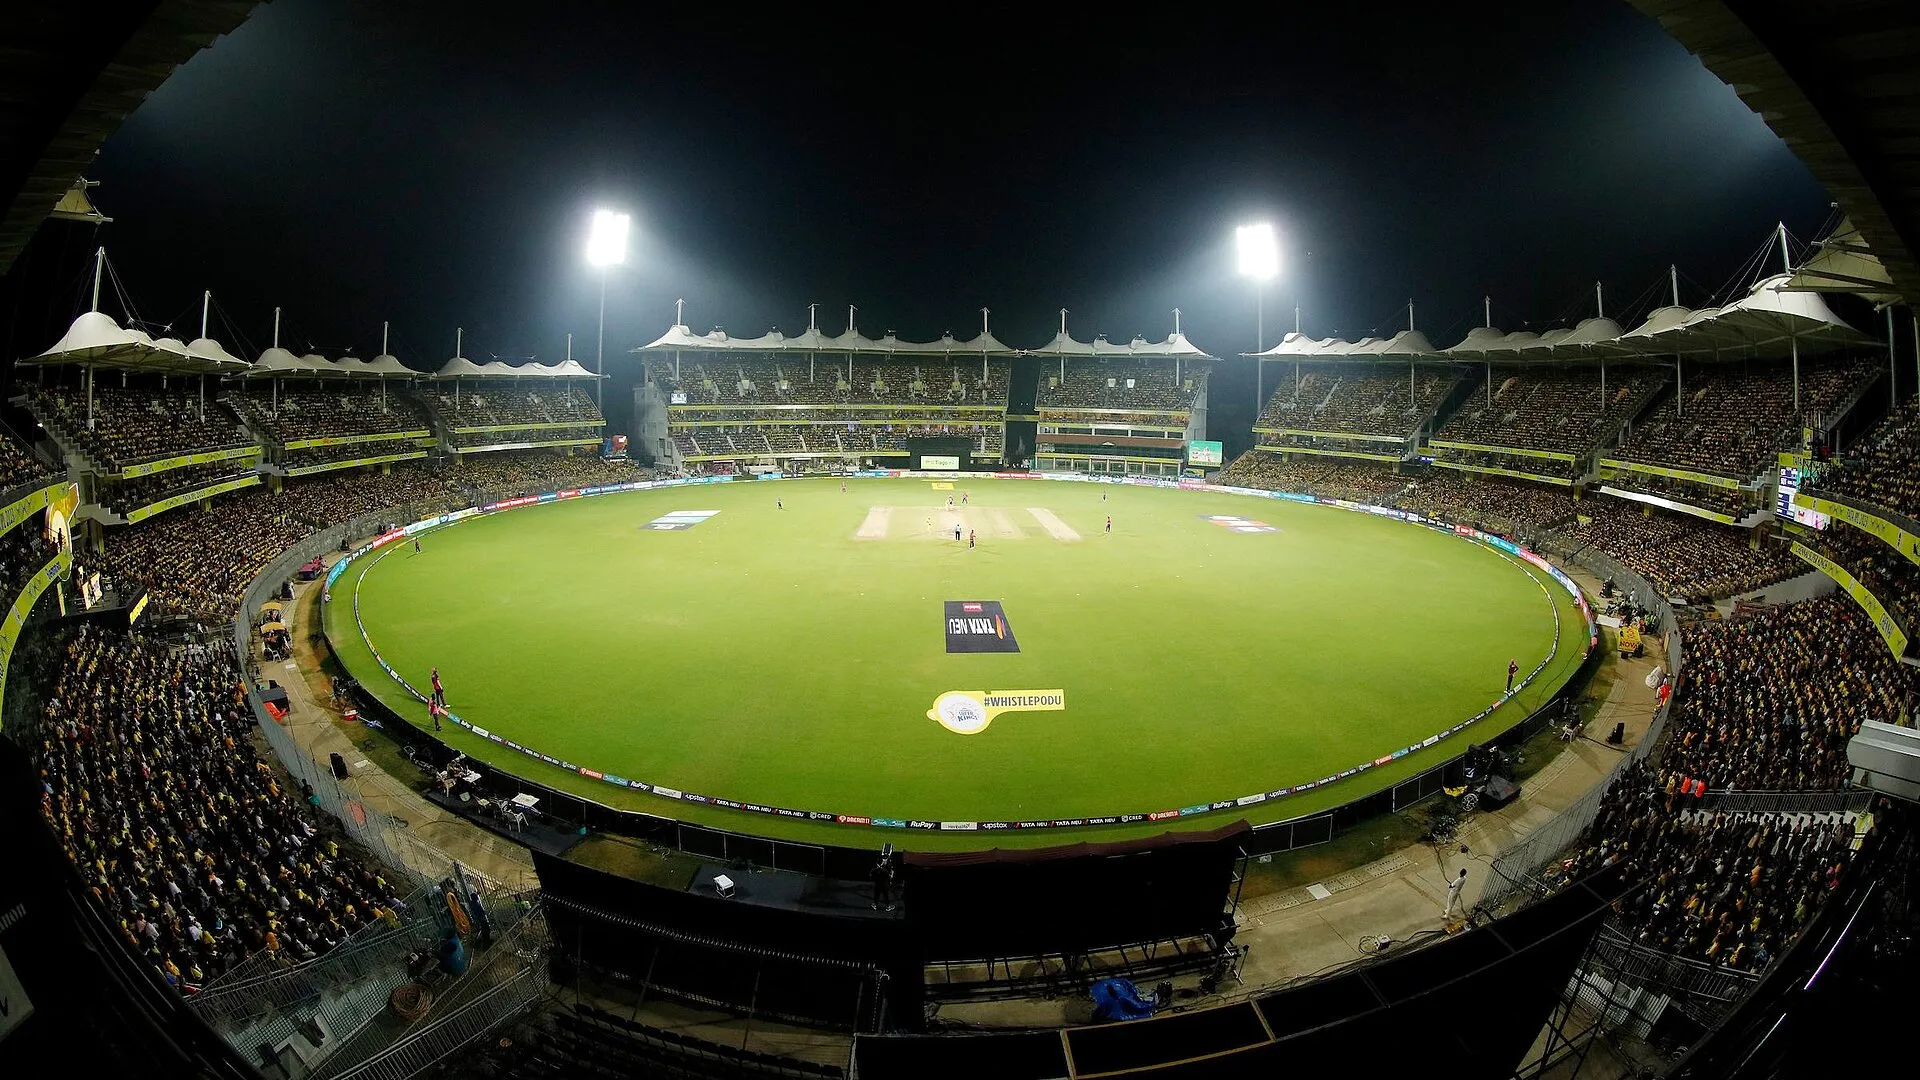 Chepauk is the second oldest cricket stadium in the country after Eden Gardens in Kolkata  Image - Wikipedia